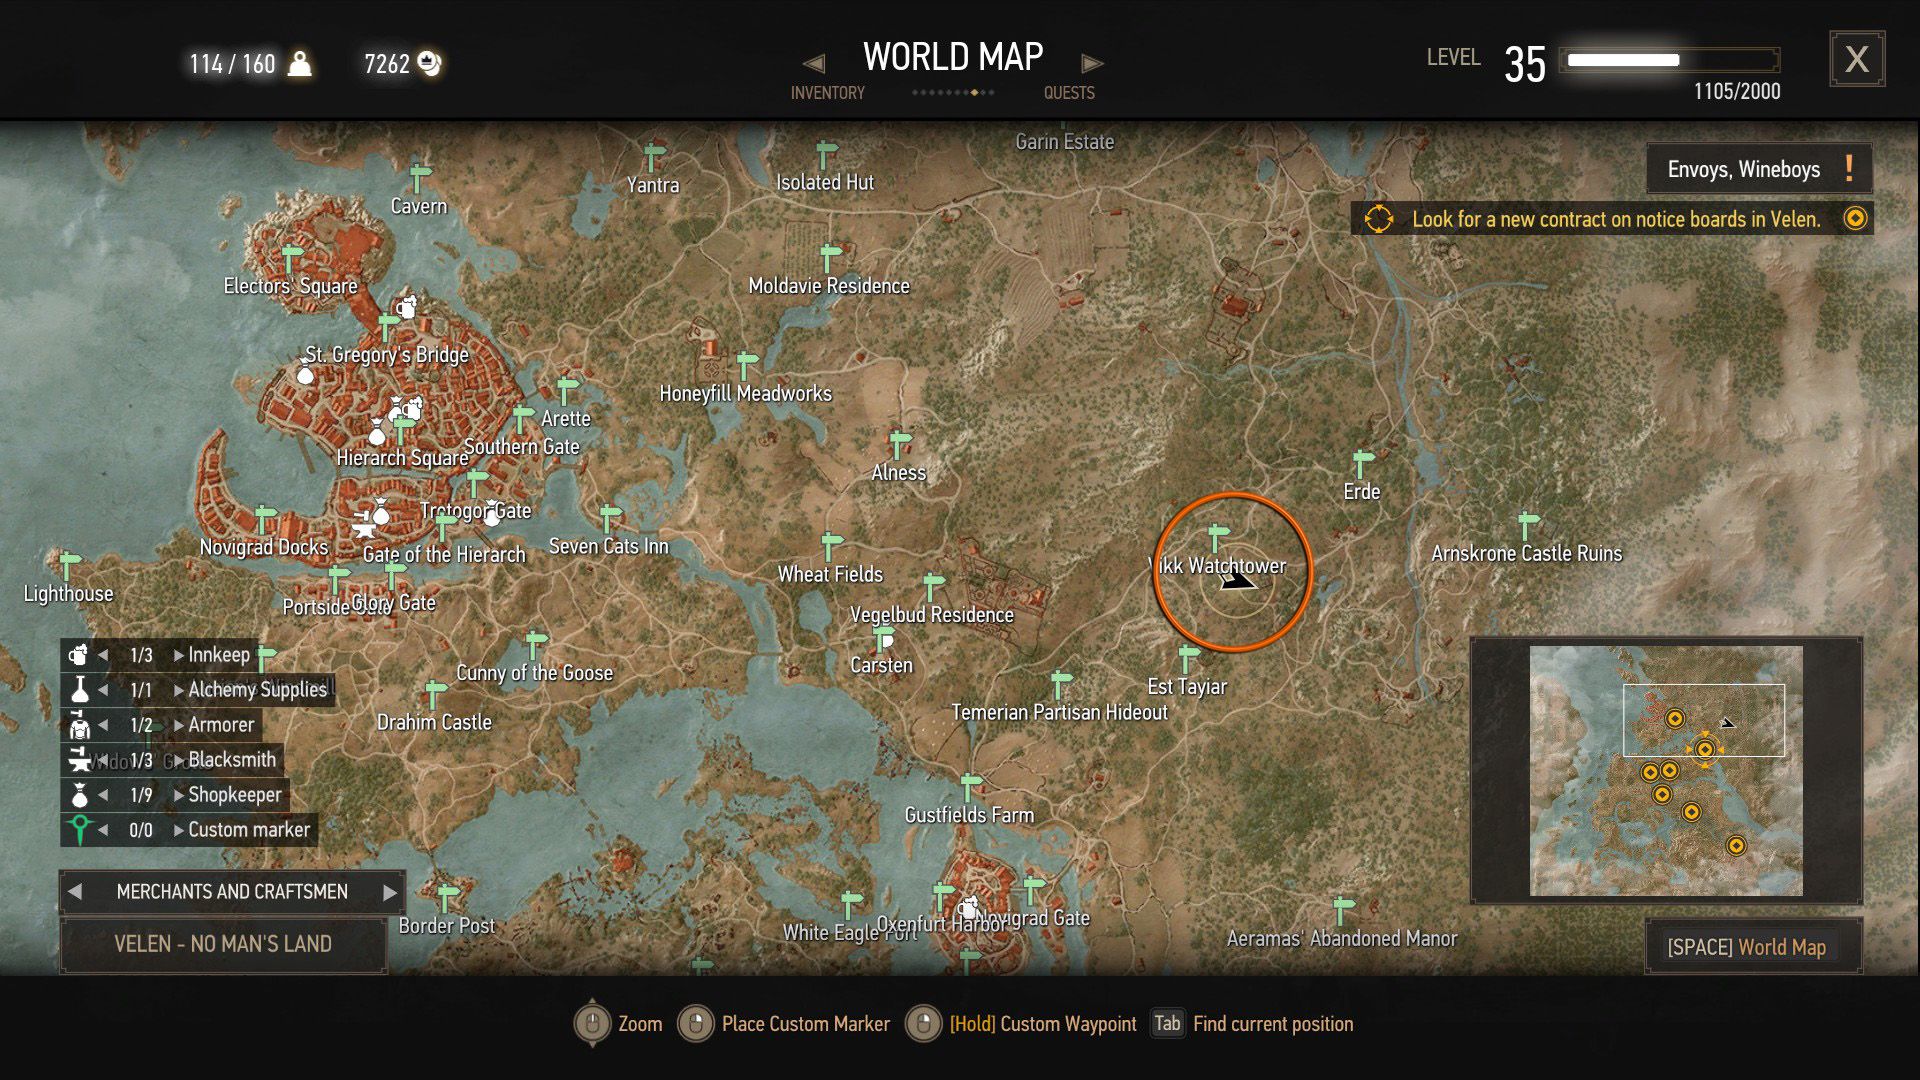 The Witcher 3 map with an orange circle above the quest location.